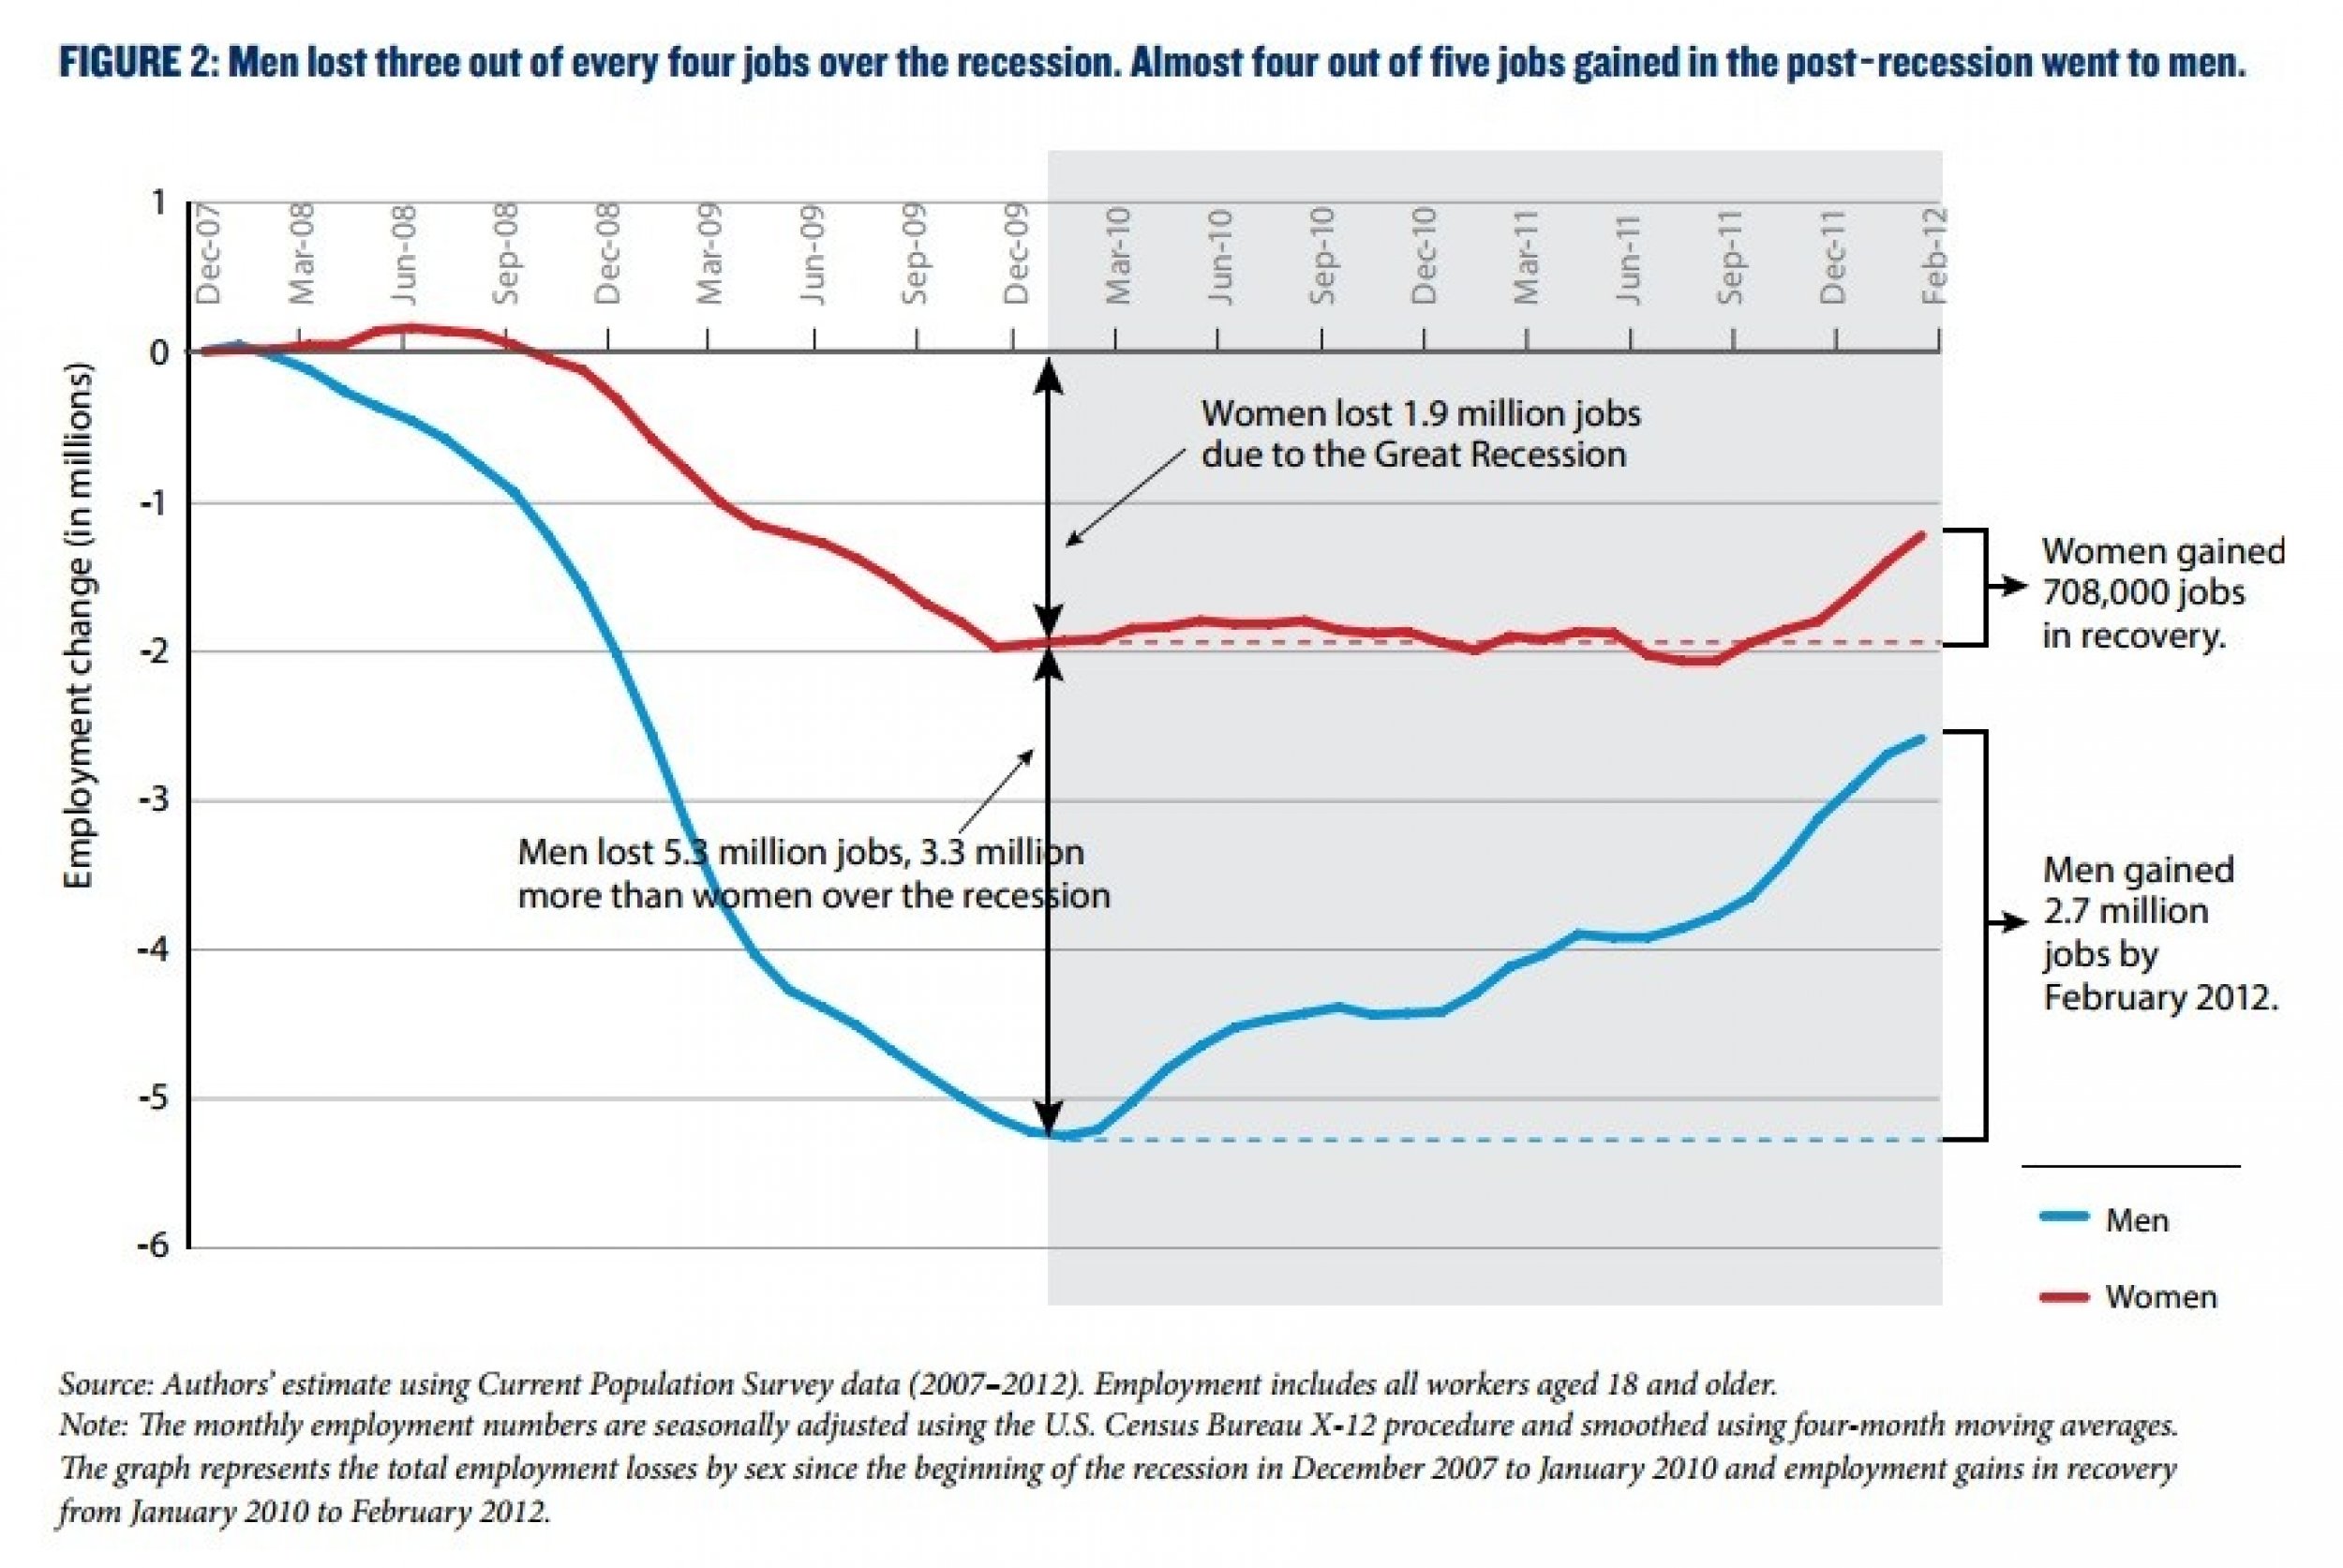 Men lost more jobs in recession and gained more in recovery